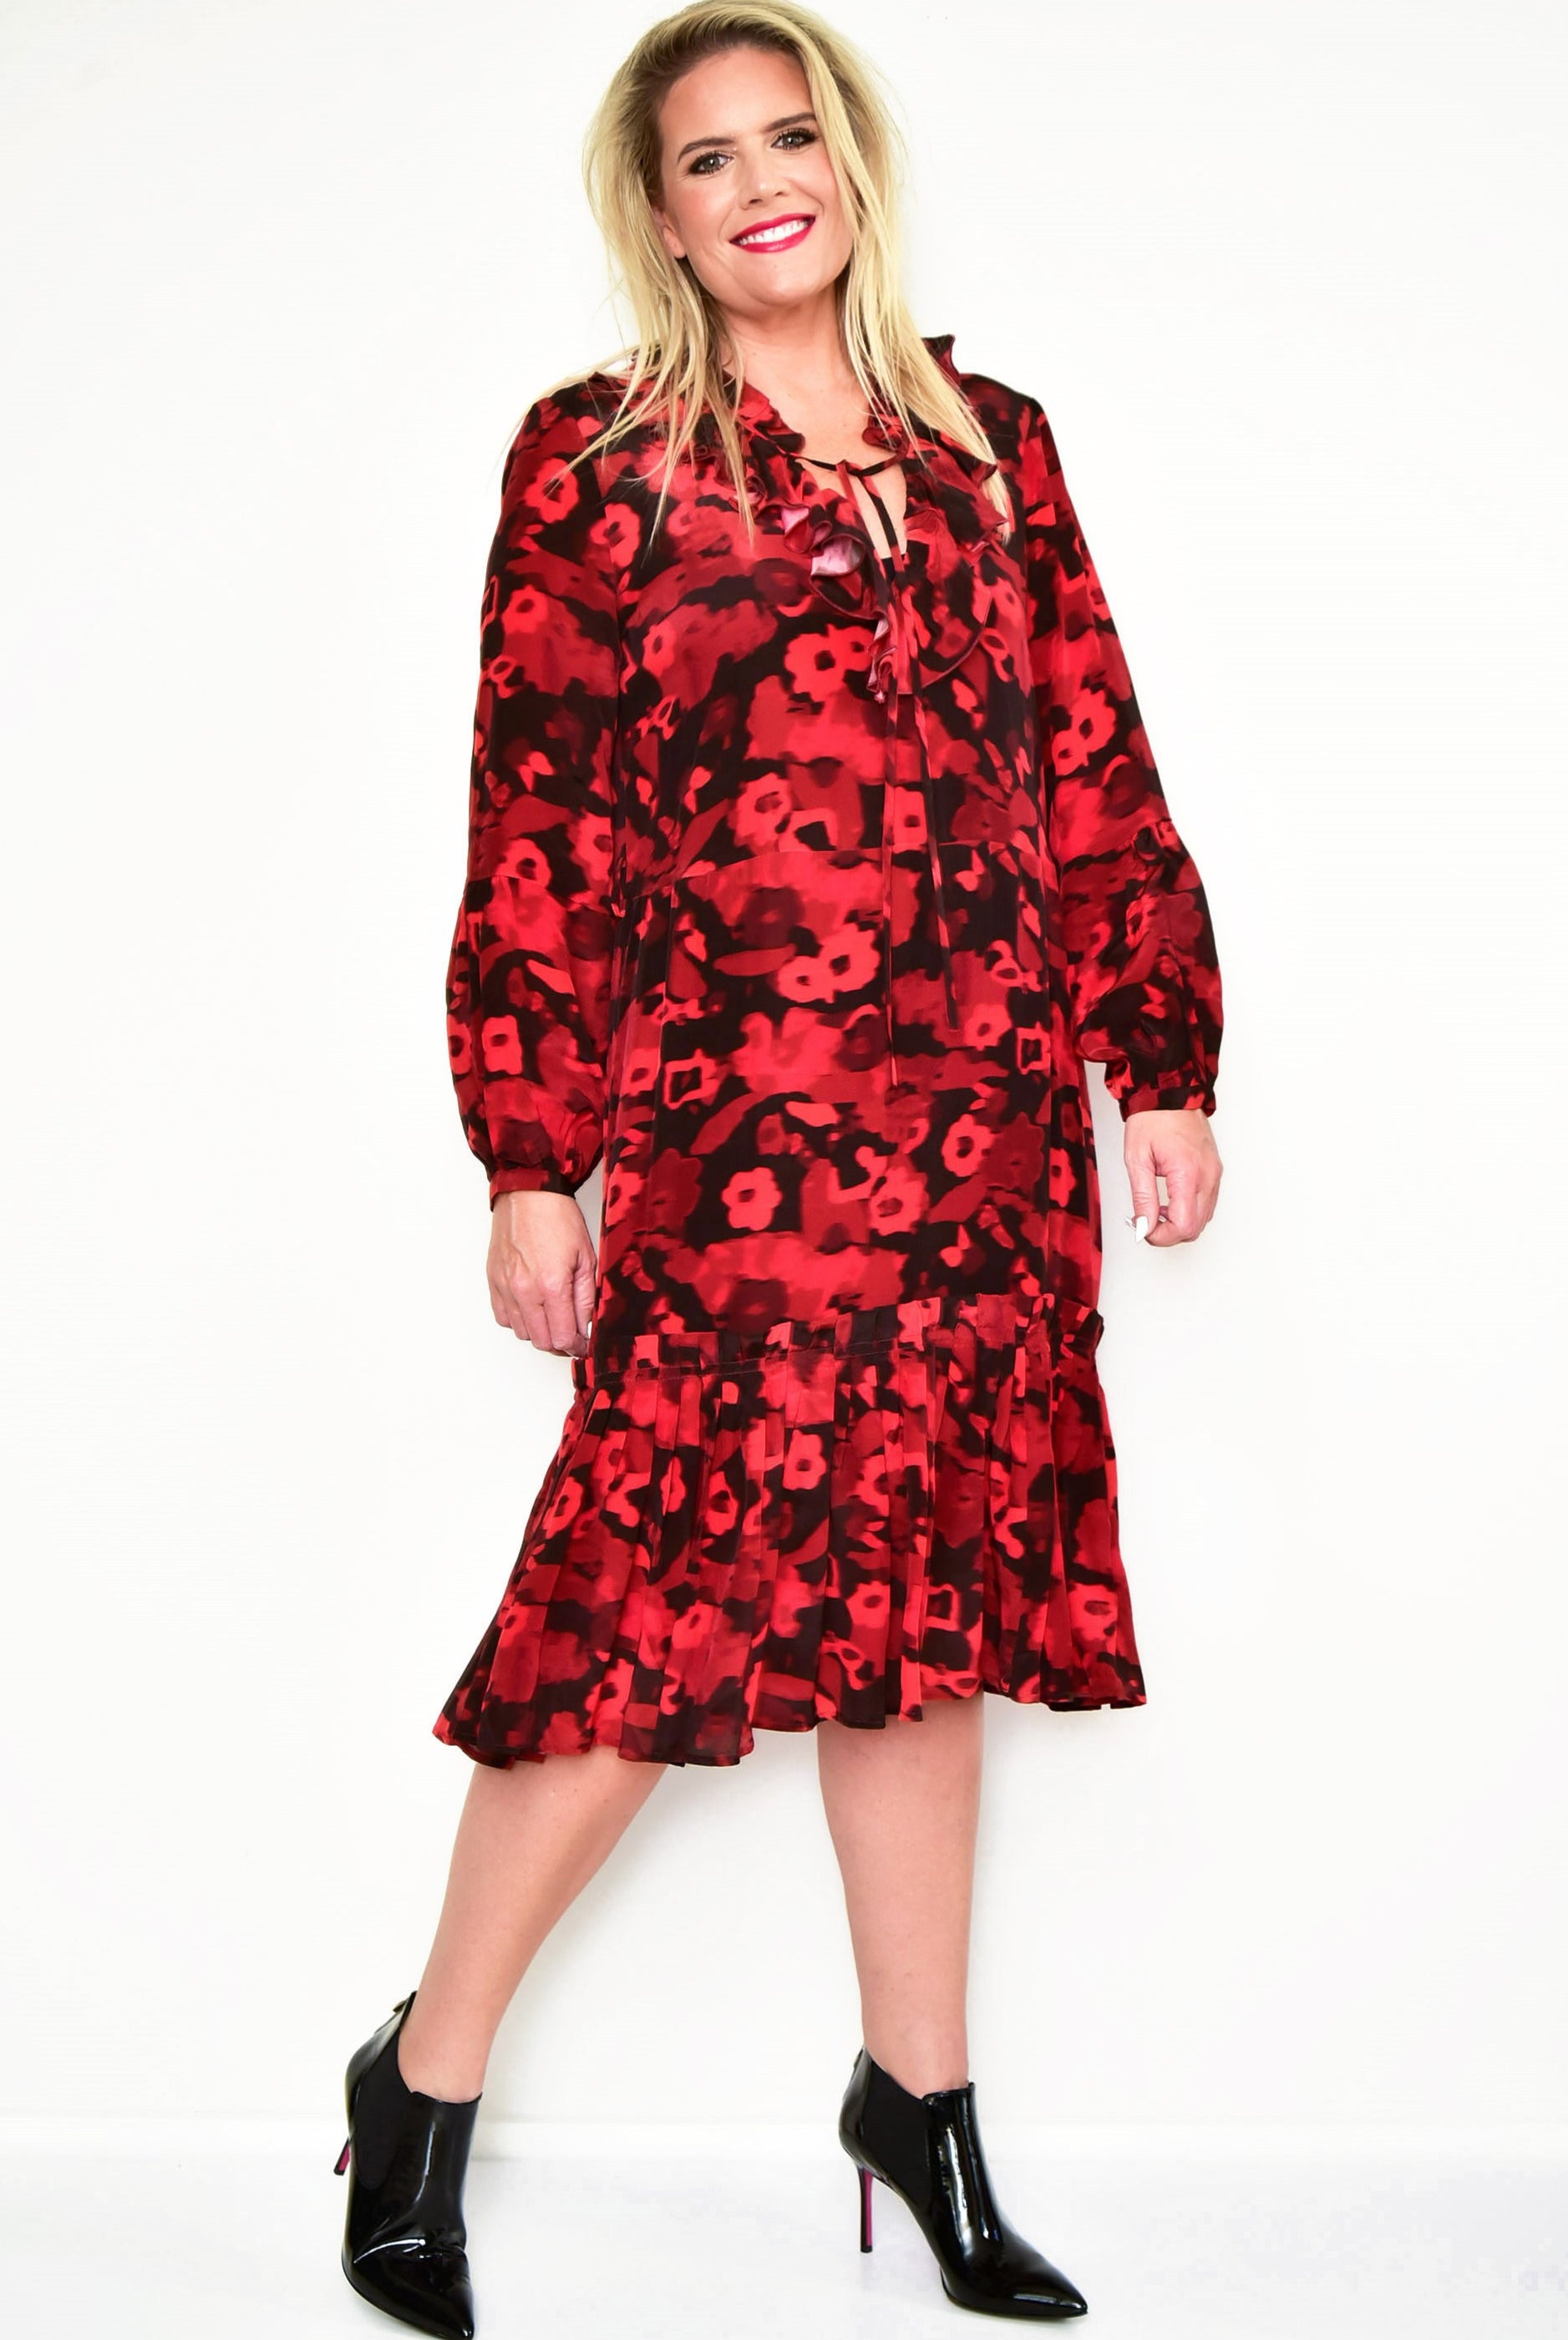 COOPER Frill Me On Dress - Red Floral - PRE ORDER - COOPER by Trelise Cooper - [product type] - Magpie Style